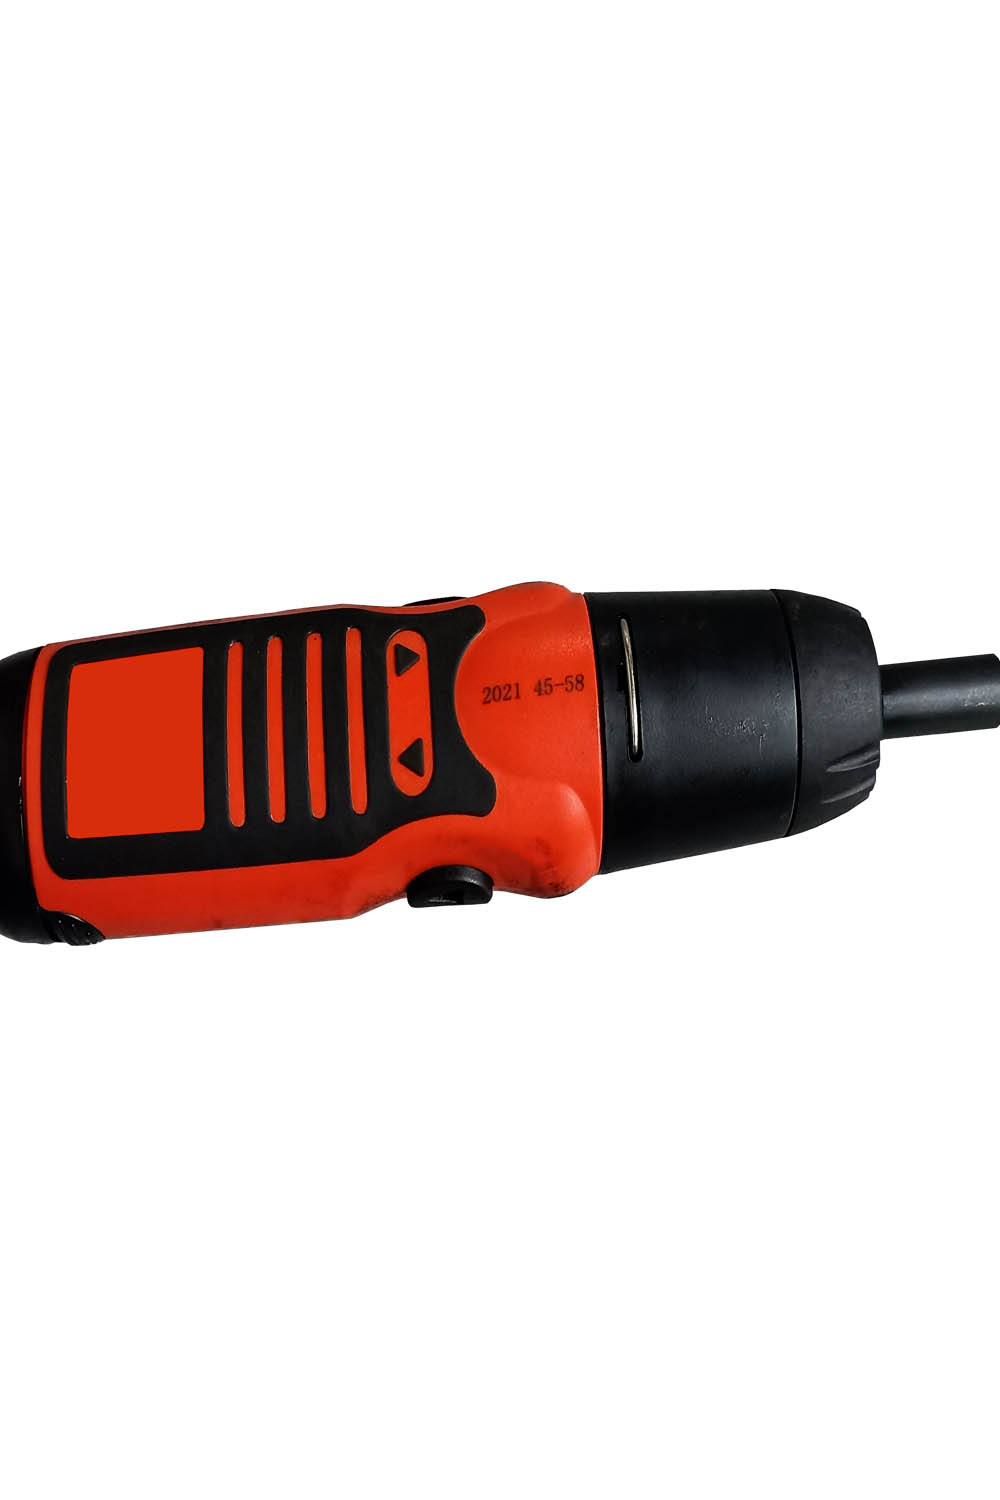 battery powered screw driver pinterest preview image.